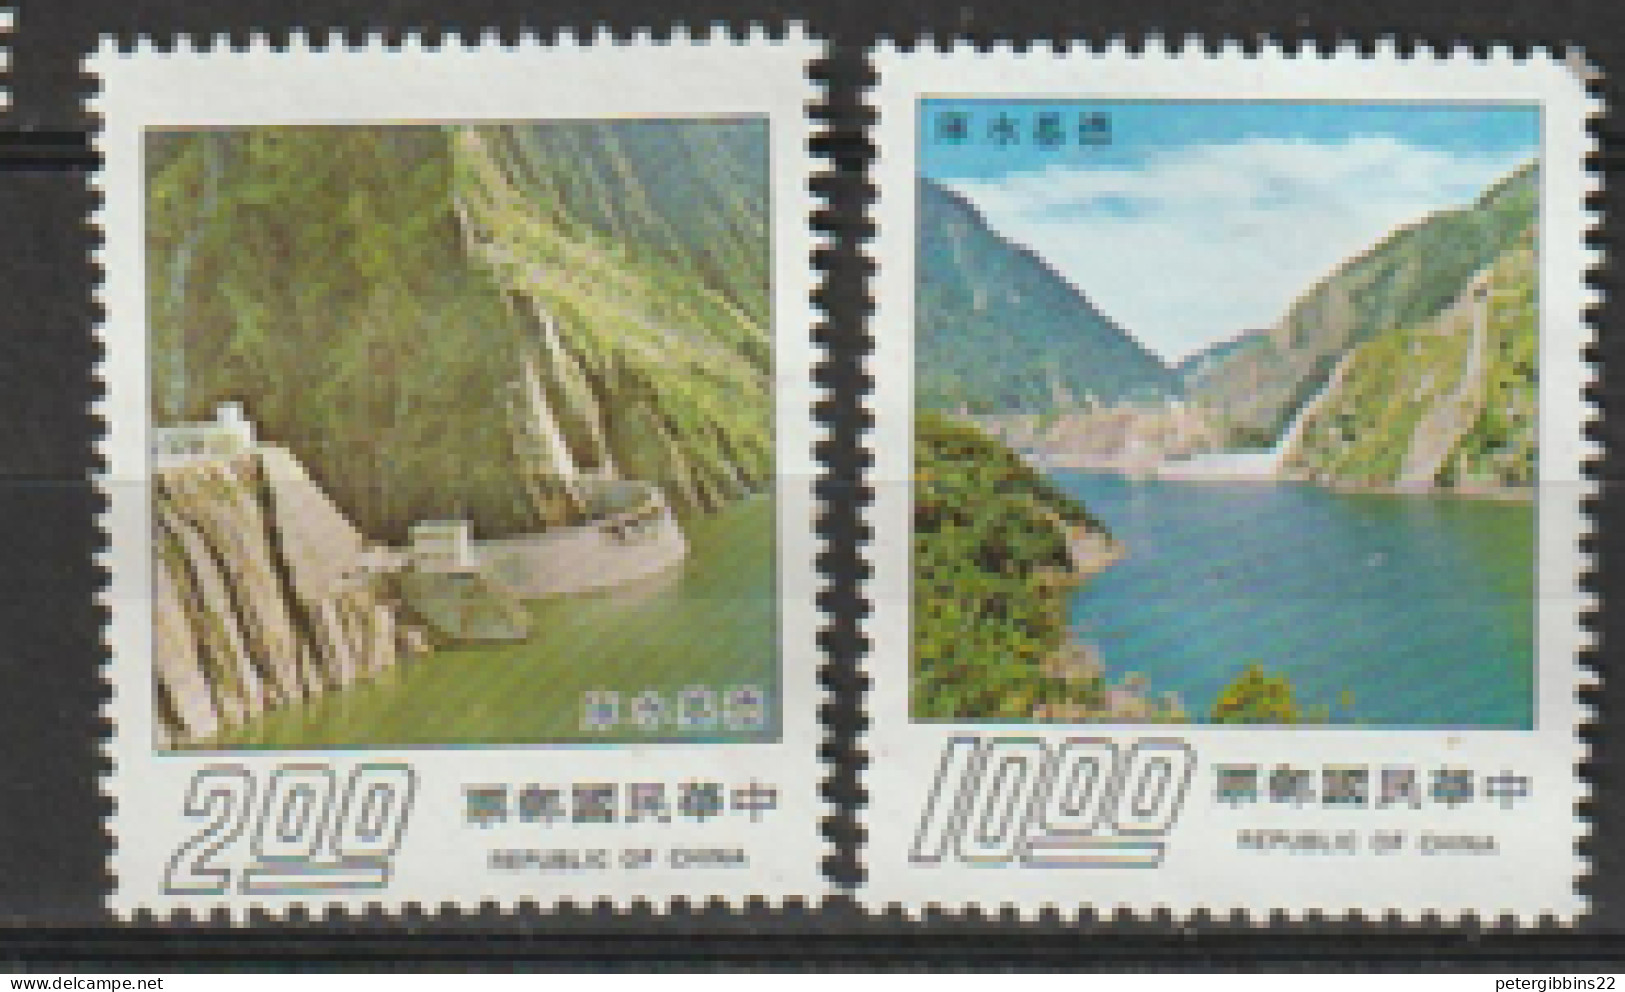 Taiwan   1976   SG  1088-9  Fams    Mint No Gum - Used Stamps